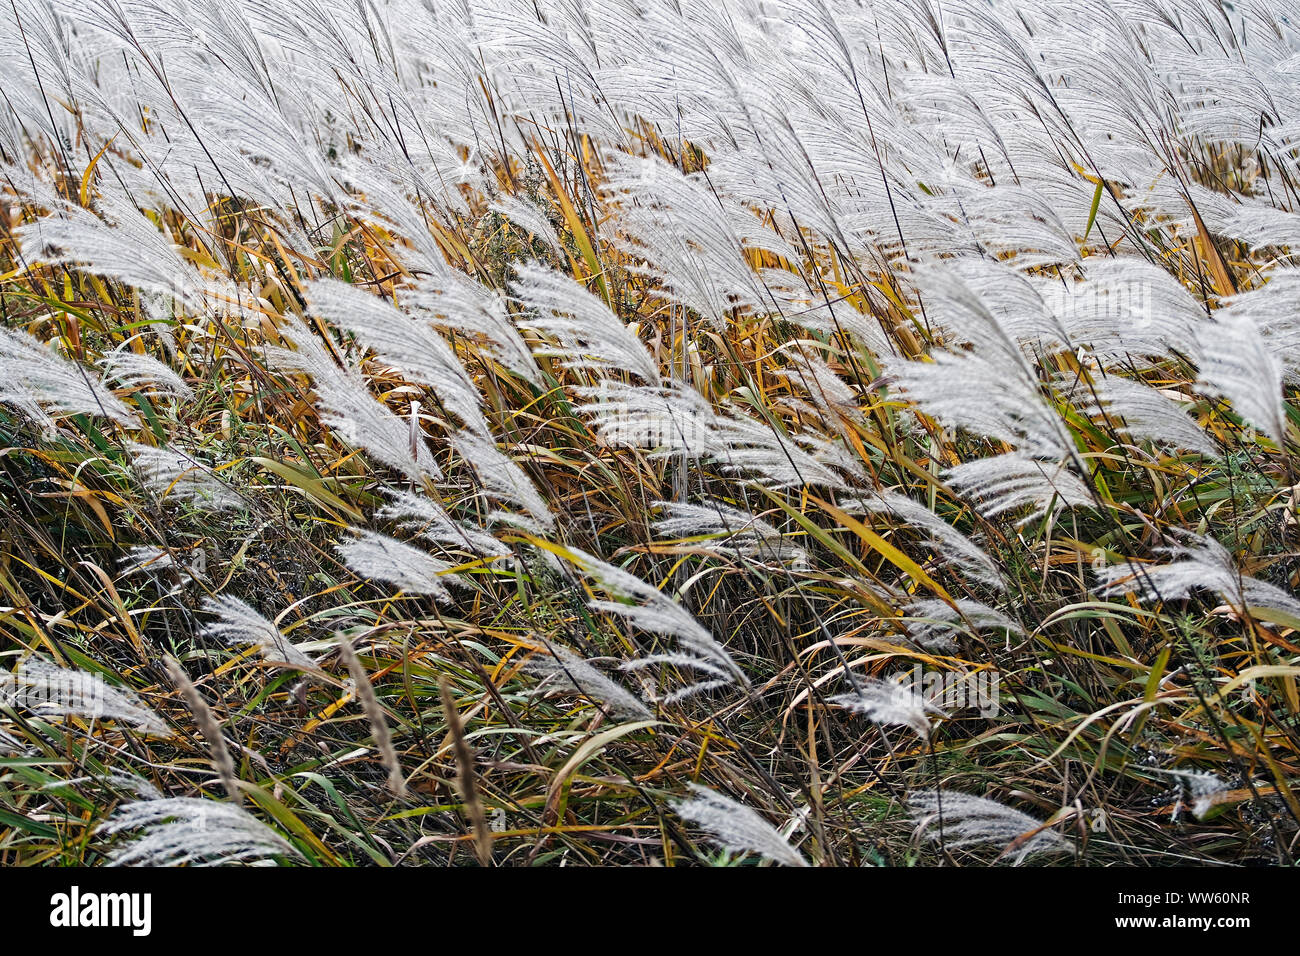 Amur silver grass, Miscanthus sacchariflorus, Silver coloured grasses growing outdoor. Stock Photo